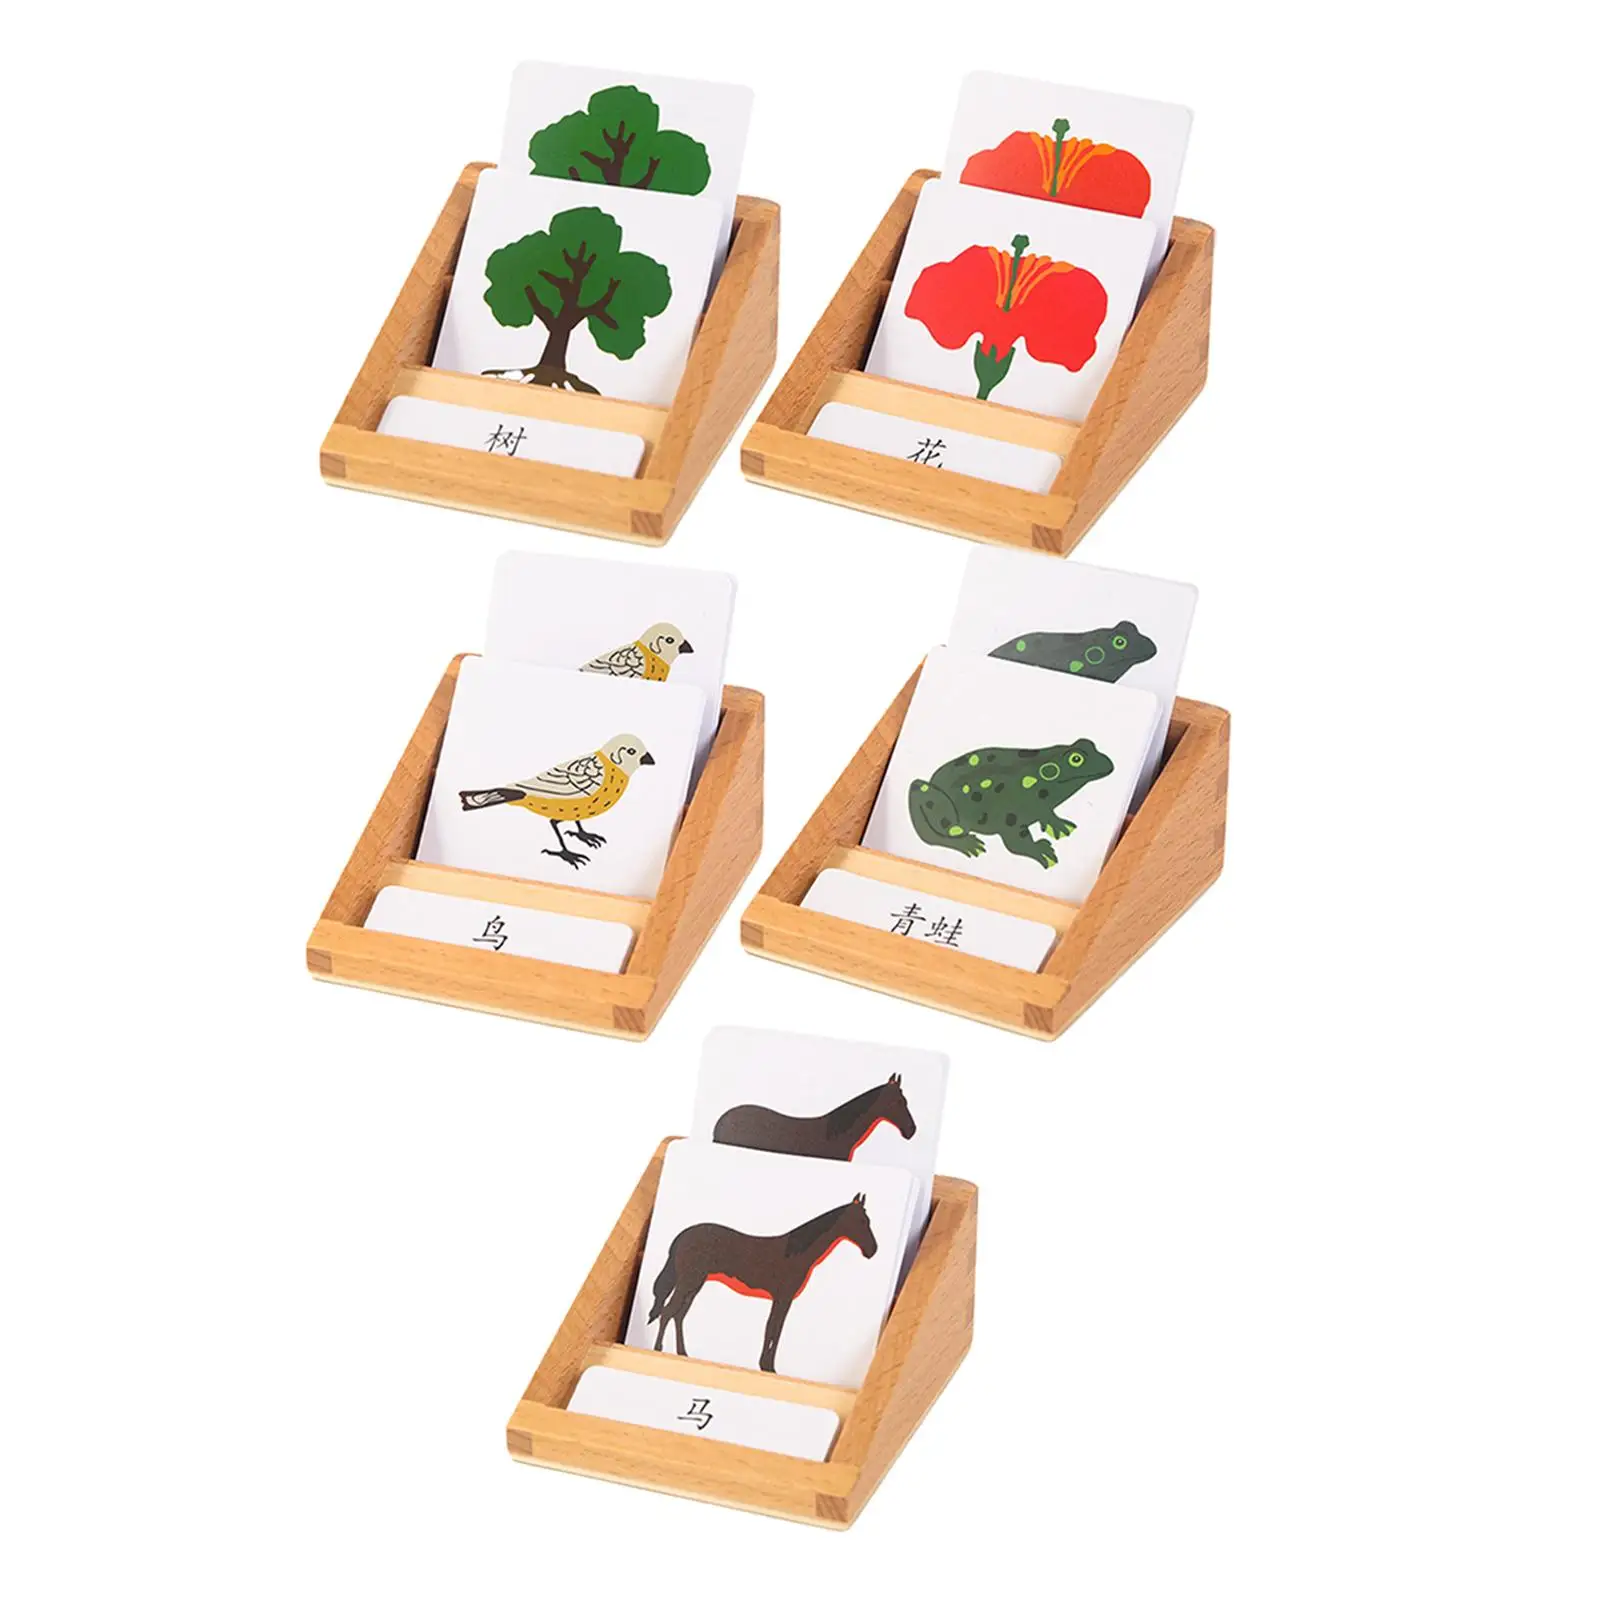 

Hand Painted Animal Growth Life Cycle Playset Early Educational Learning for Children 4-8 Years Olds Toddlers Kids